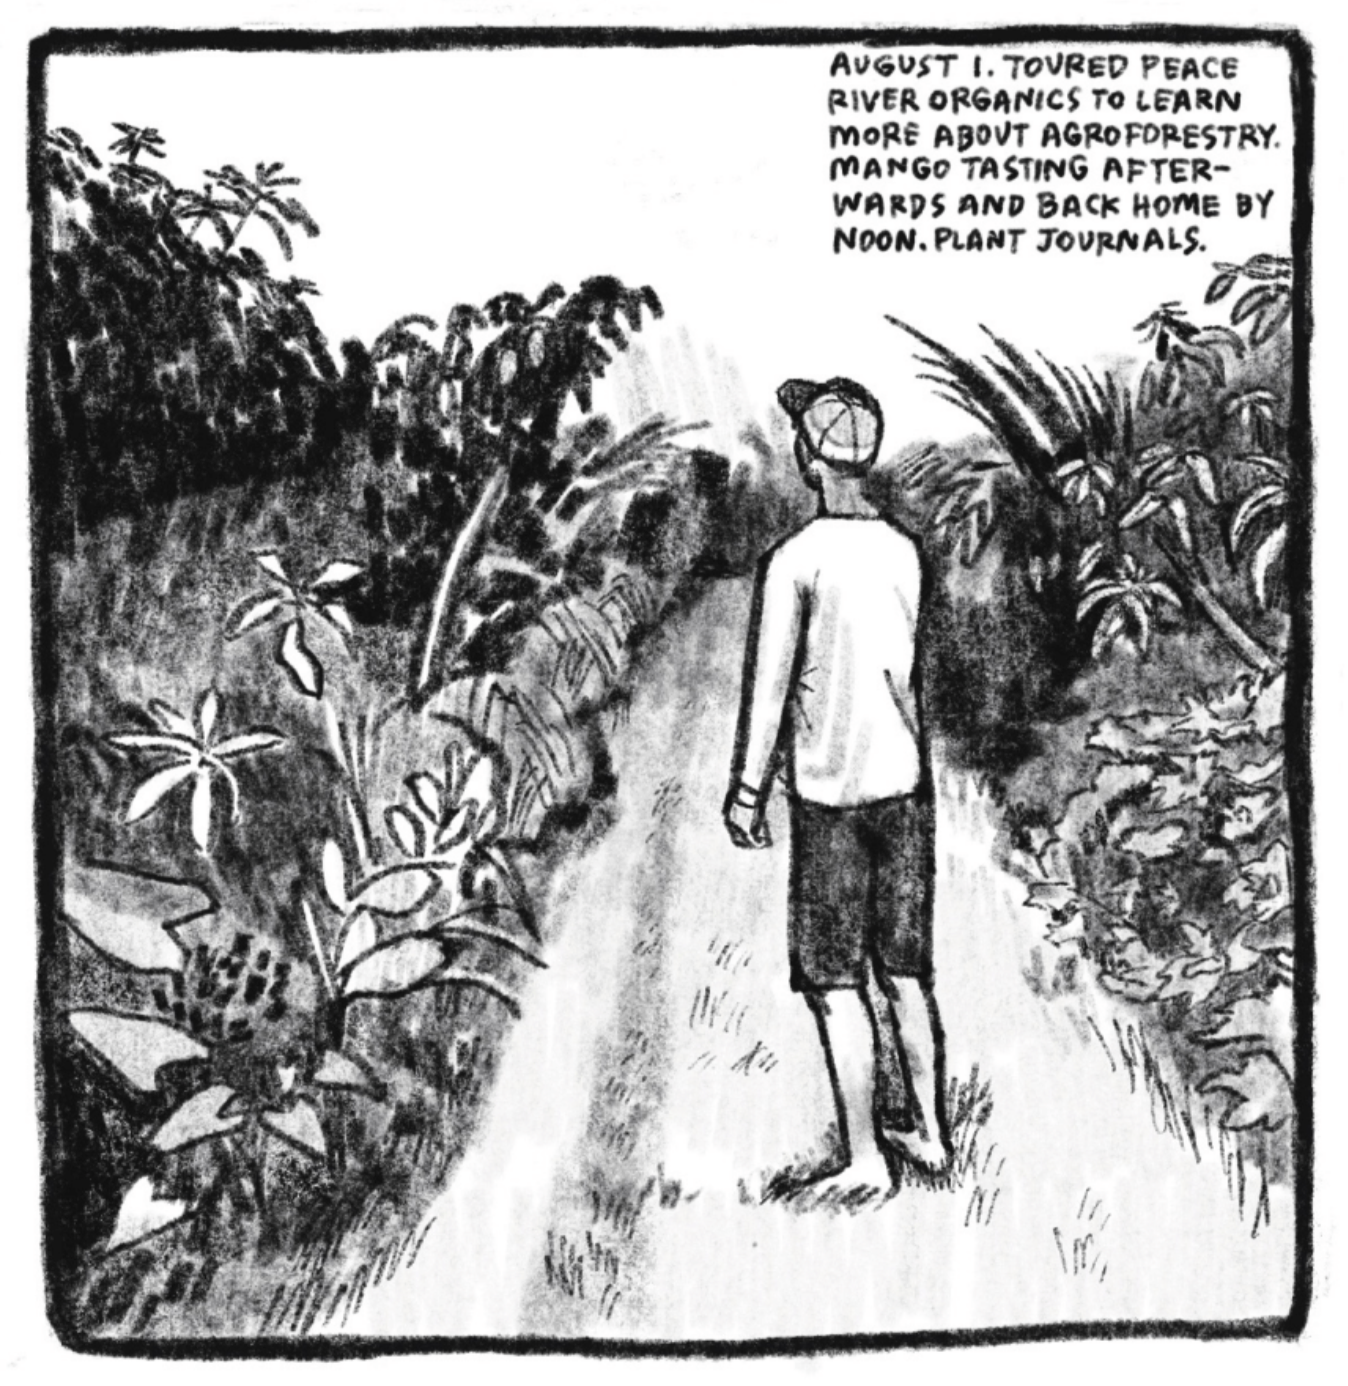 6. From behind, we see a man standing on a grassy path sandwiched by large swaths of tropical-looking flora. The man is wearing a baseball cap, a white long-sleeve shirt, and dark gray shorts; he is bare foot. The plants that surround him look like a lush forest, full of large flowers, grasses, and shrubs. â€œAugust 1. Toured Peace River Organics to learn more about agroforestry. Mango tasting afterwards and back home by noon. Plant journals.â€